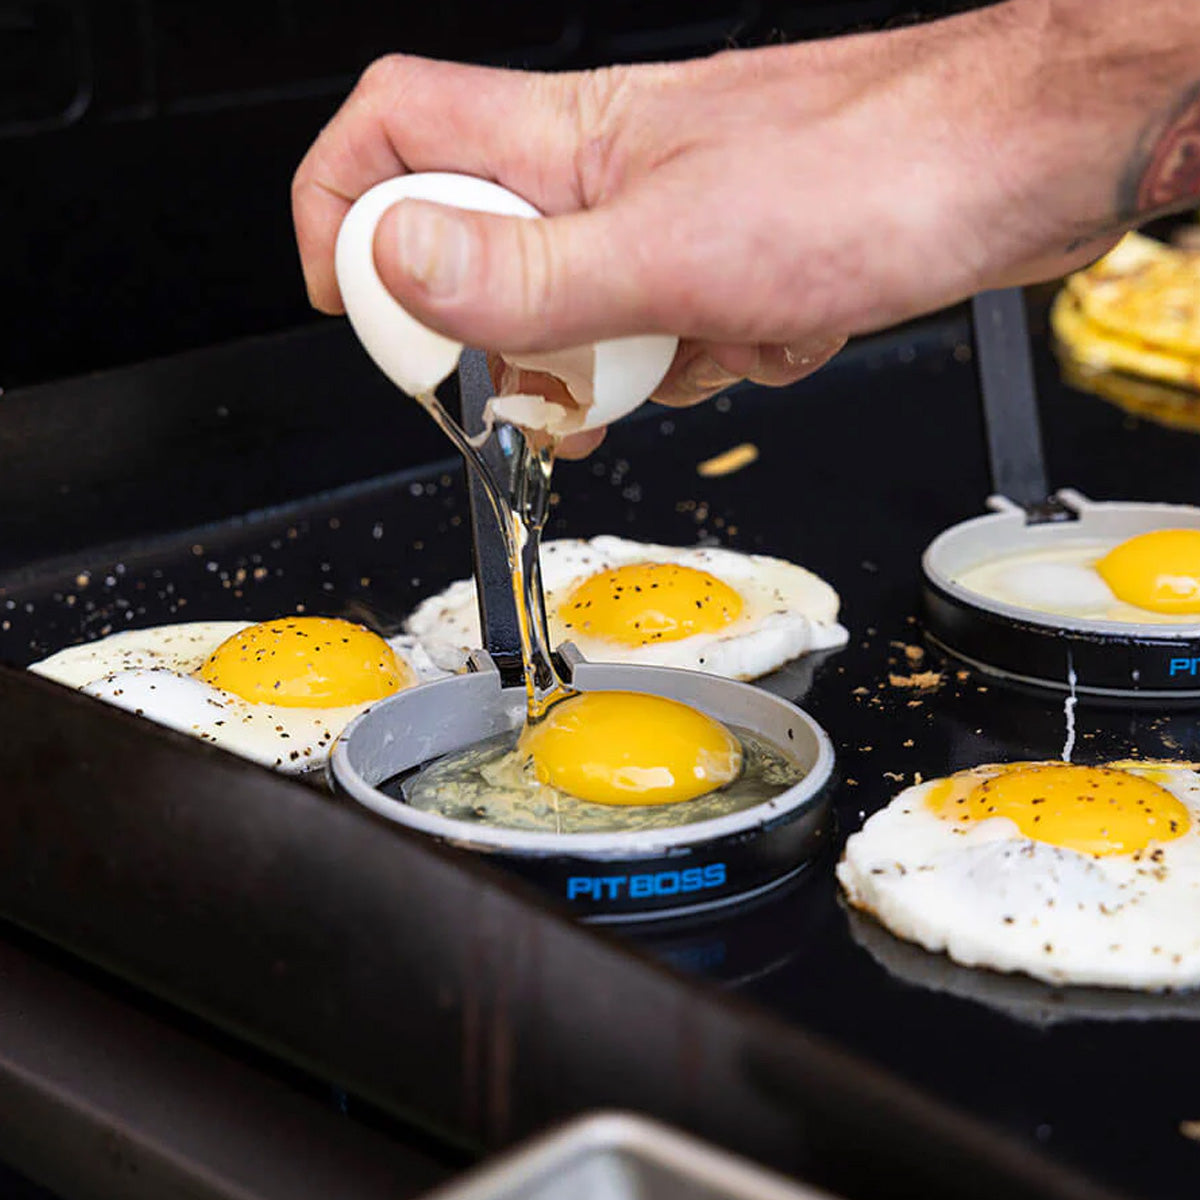 Pit Boss Ultimate Griddle Breakfast Kit Perfect Eggs and Pancakes Every Time